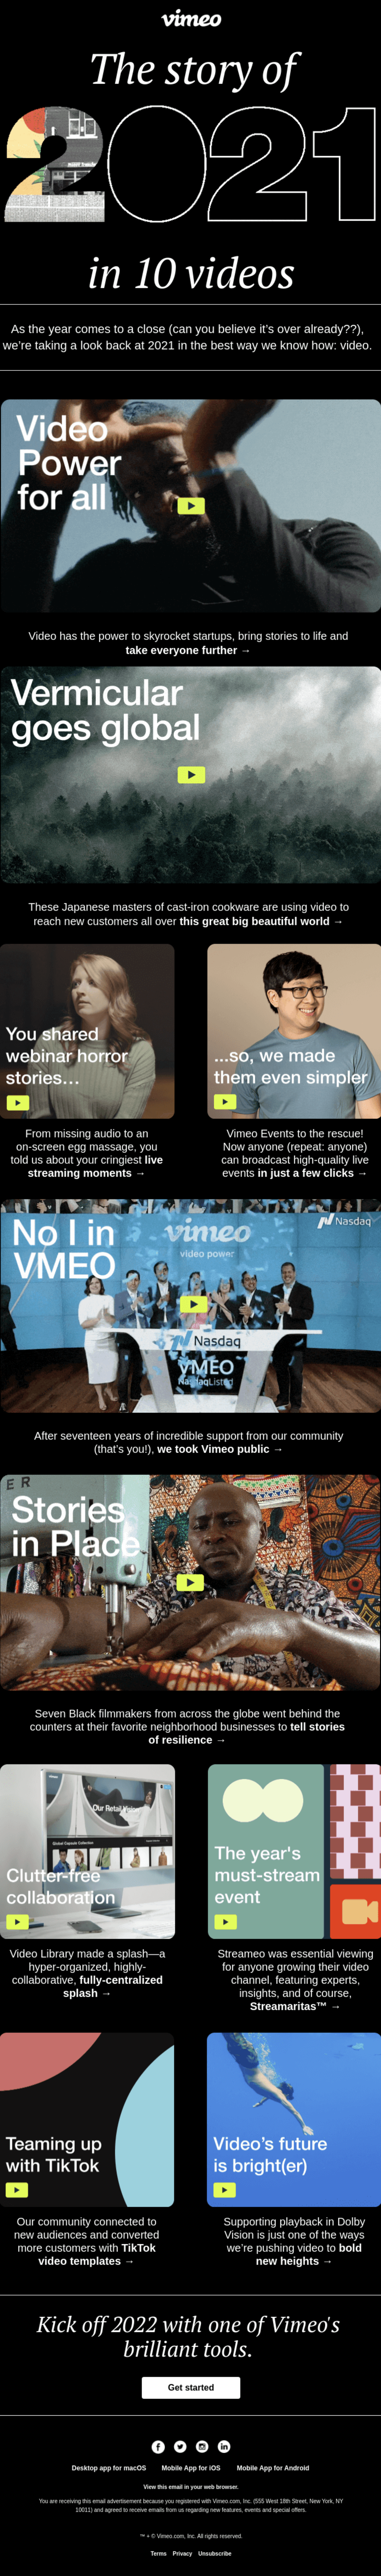 GIFs in SaaS Emails: Screenshot of Vimeo's year-in-review email